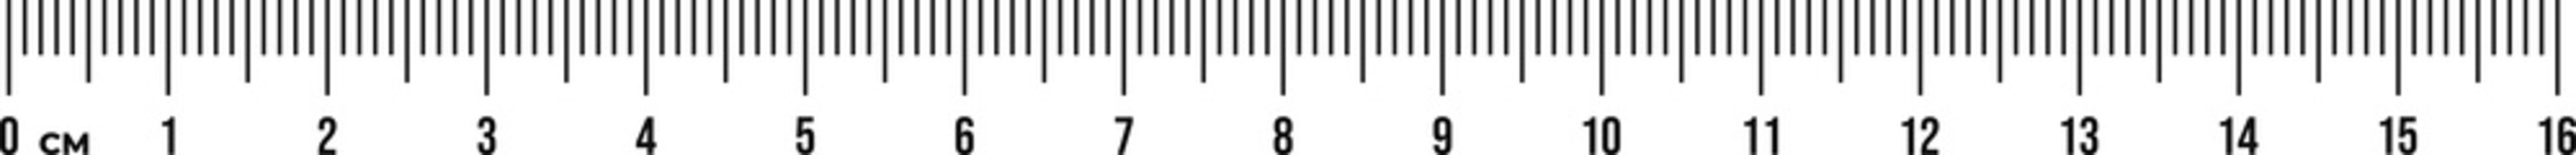 Ruler scale 16 cm. Centimeter scale for measuring